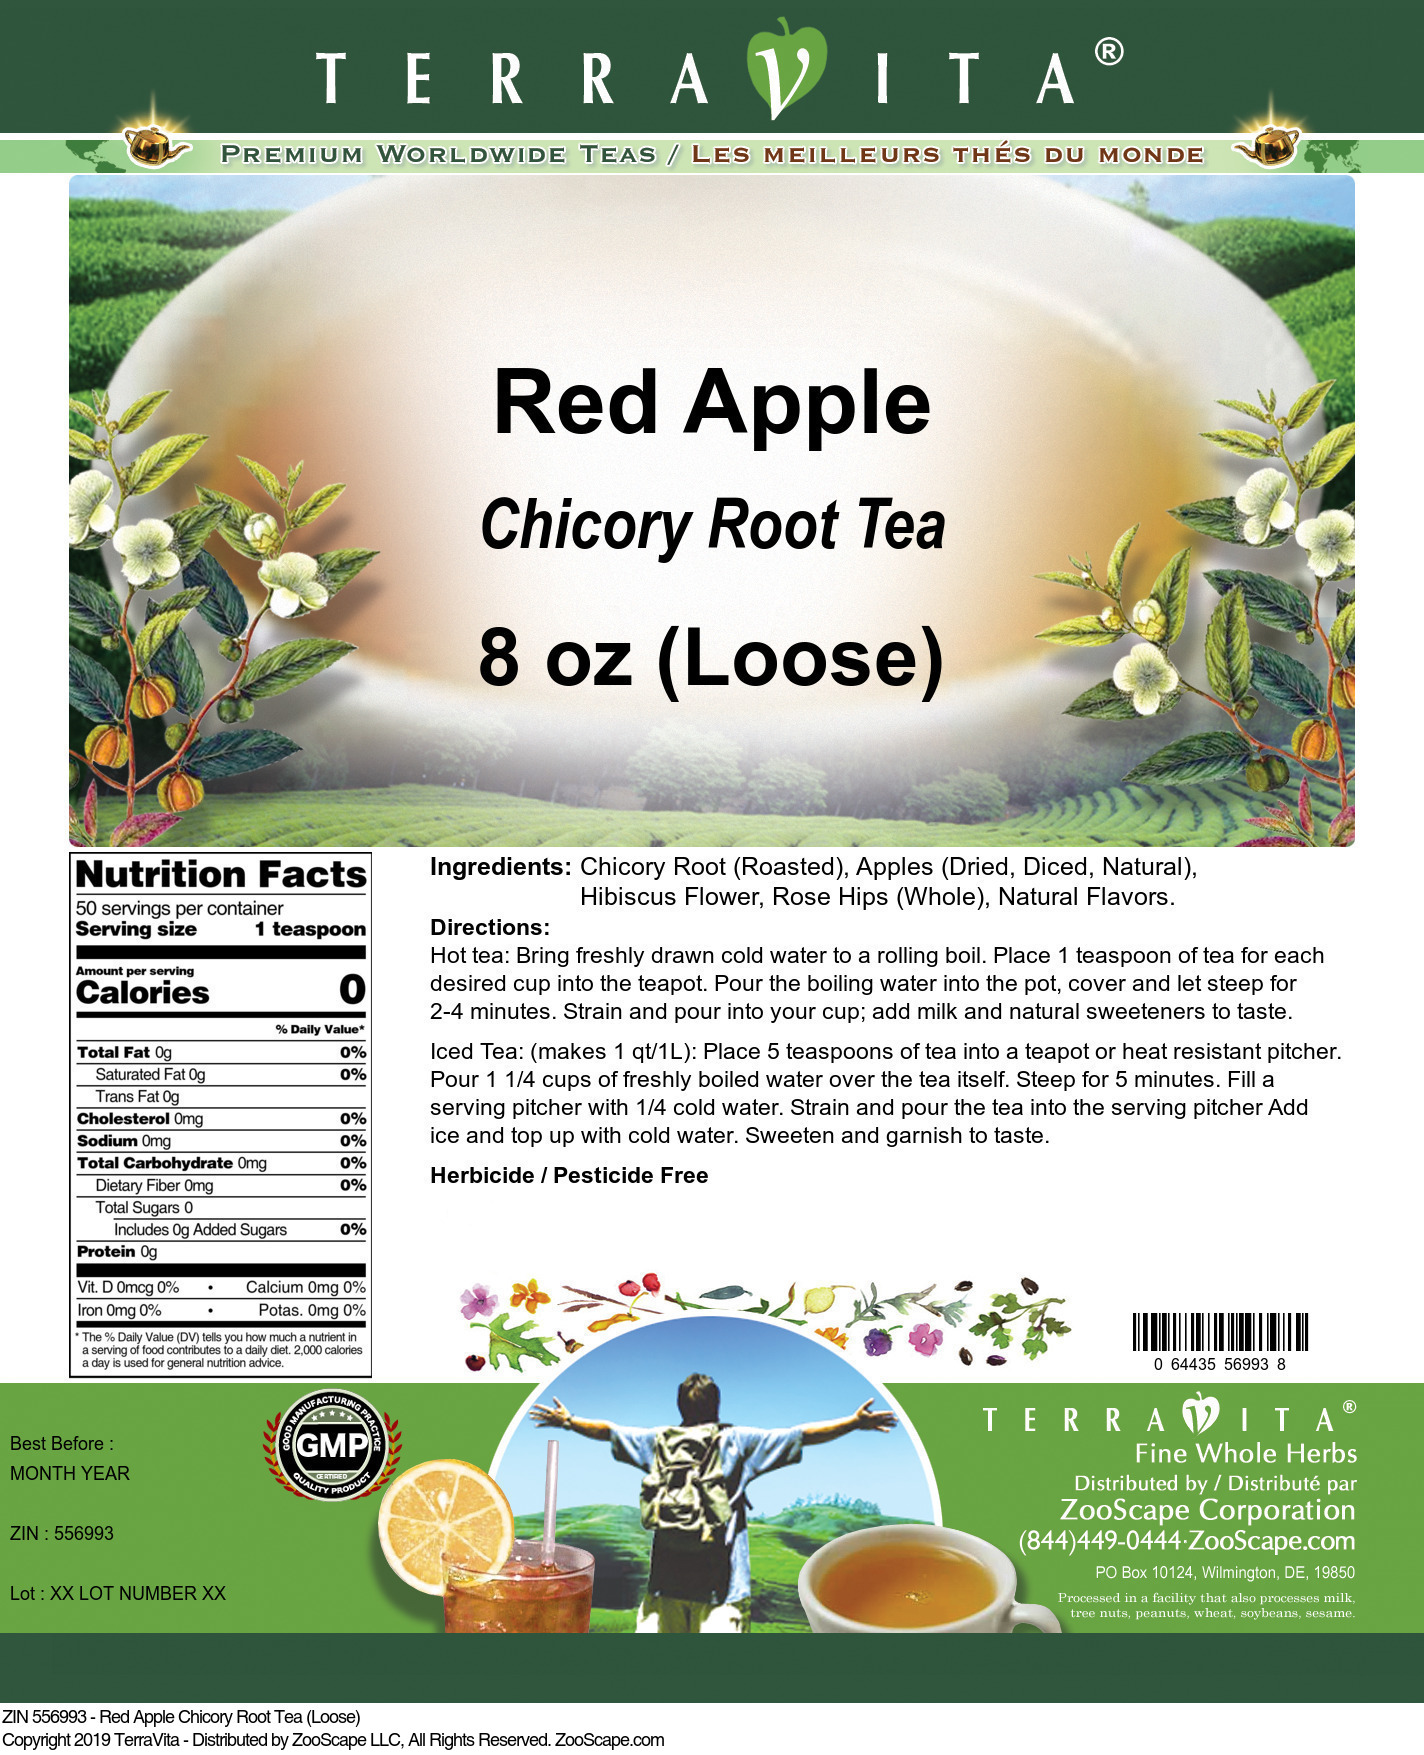 Red Apple Chicory Root Tea (Loose) - Label